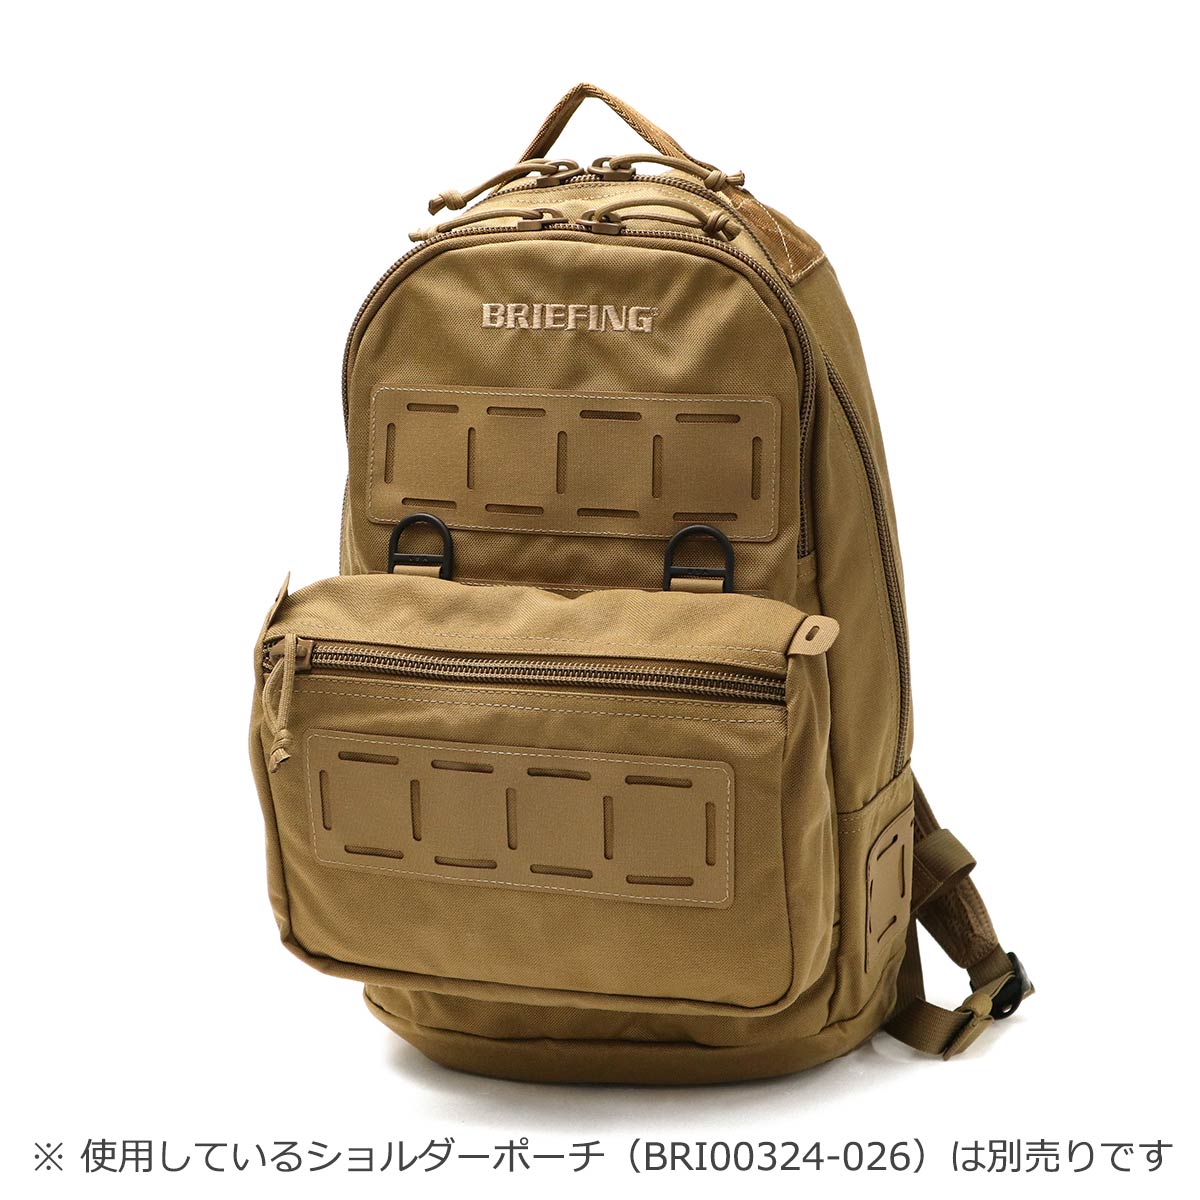 BRIEFING PG ASSAULT PACK / USA バックパック 黒